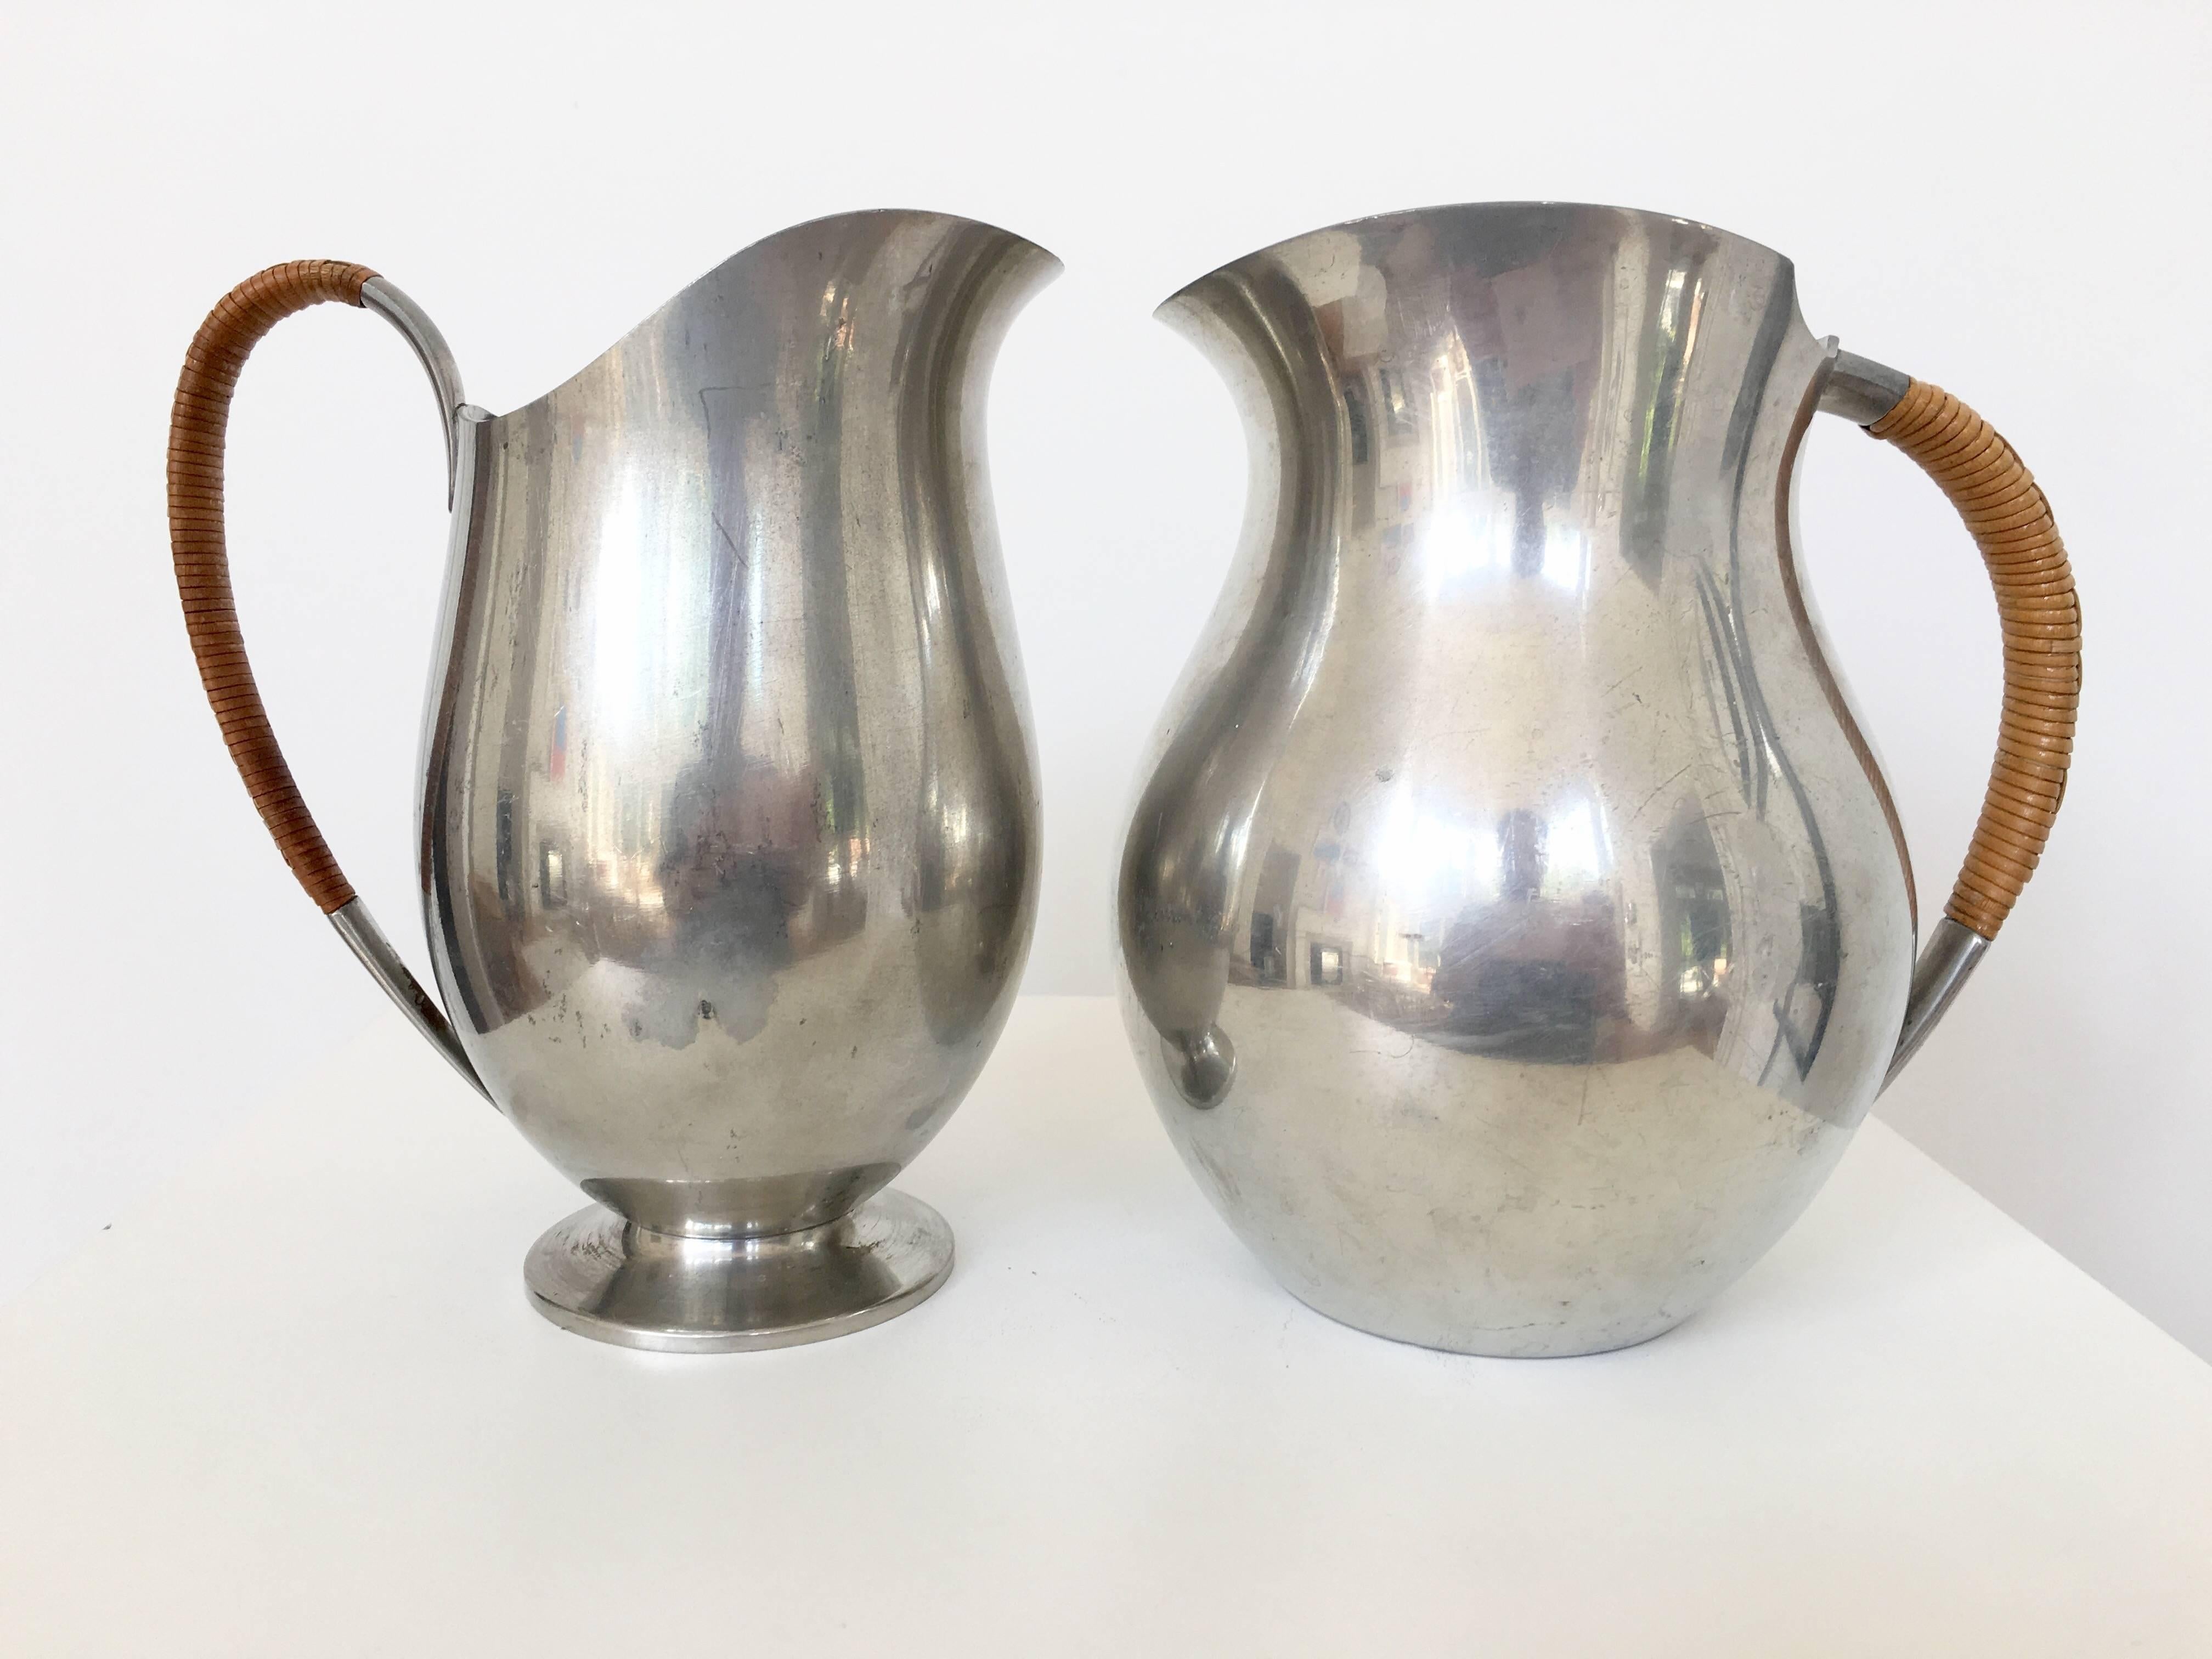 The forms of these two pitchers couldn't be better. They are both wonderful to hold and use. The body is entirely made of pewter and the handles are wrapped in wicker giving them a terrific design detail. Each pitcher is a bit different in size and